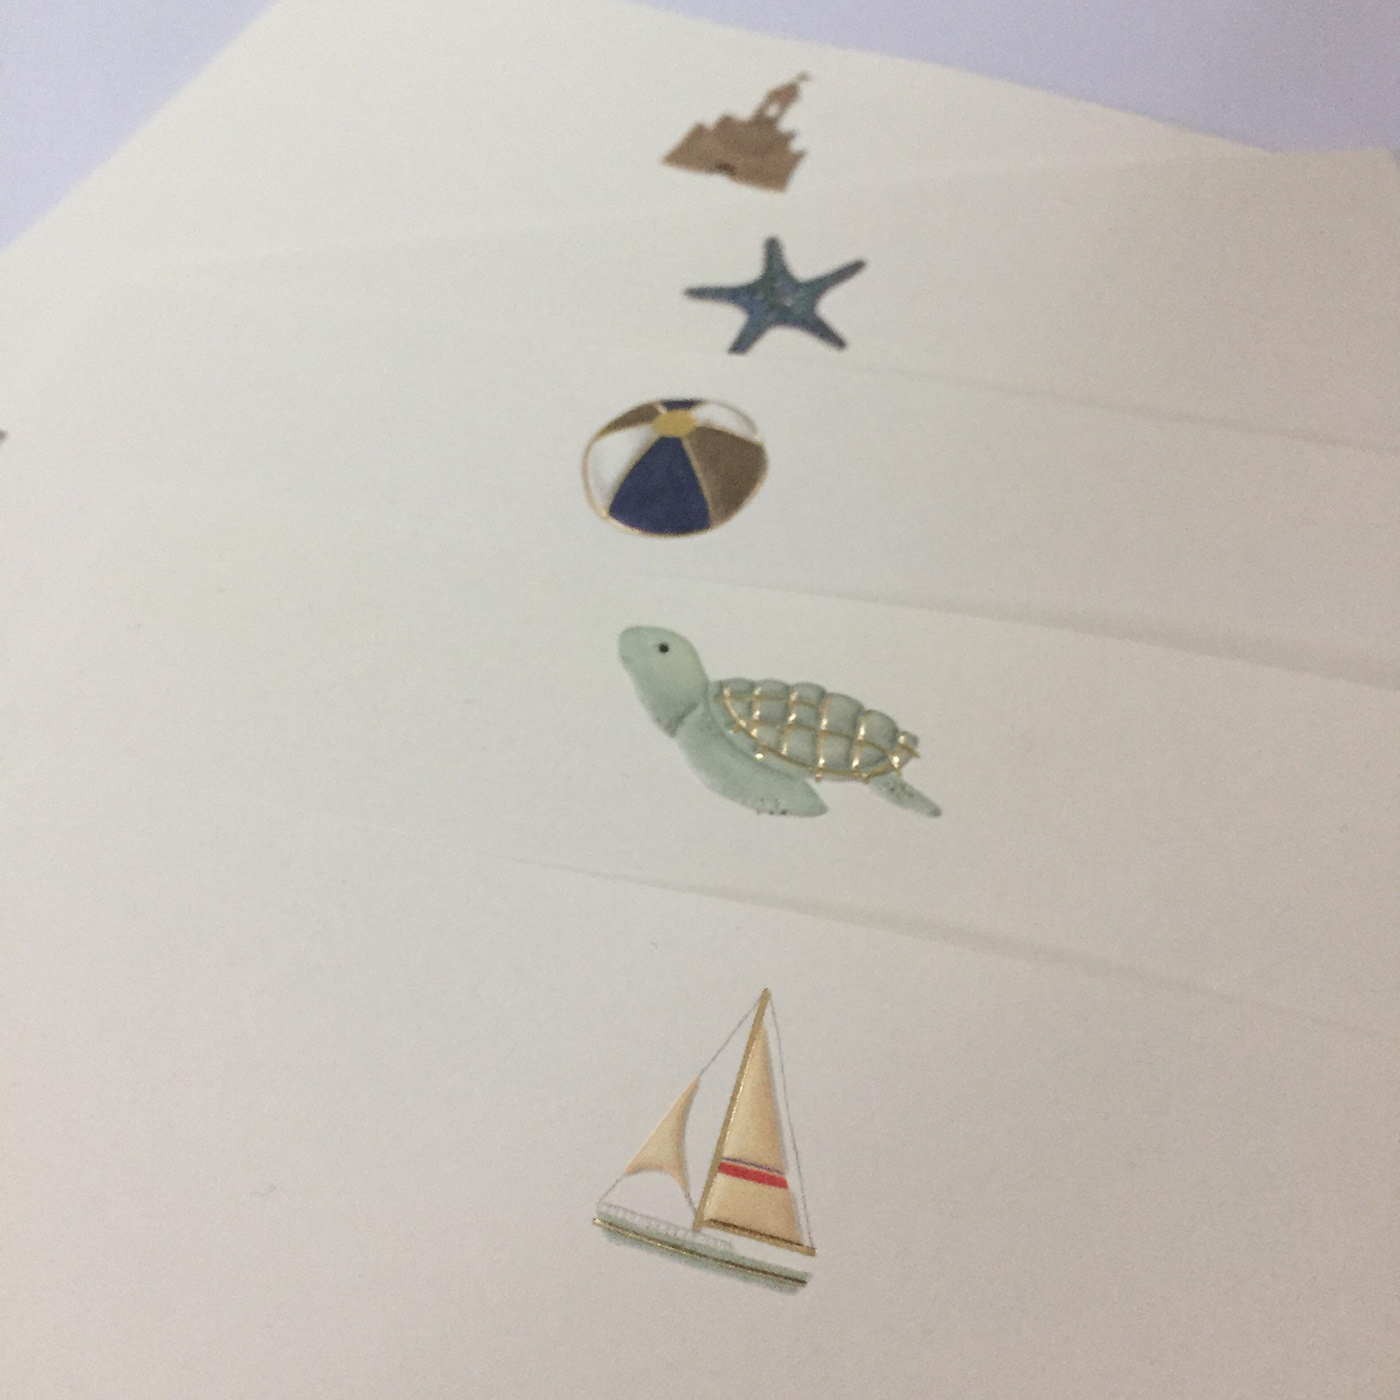 gifttag card personalized dog kids boat starfish sandcastle beach ball beach Turtle hotstamp gold